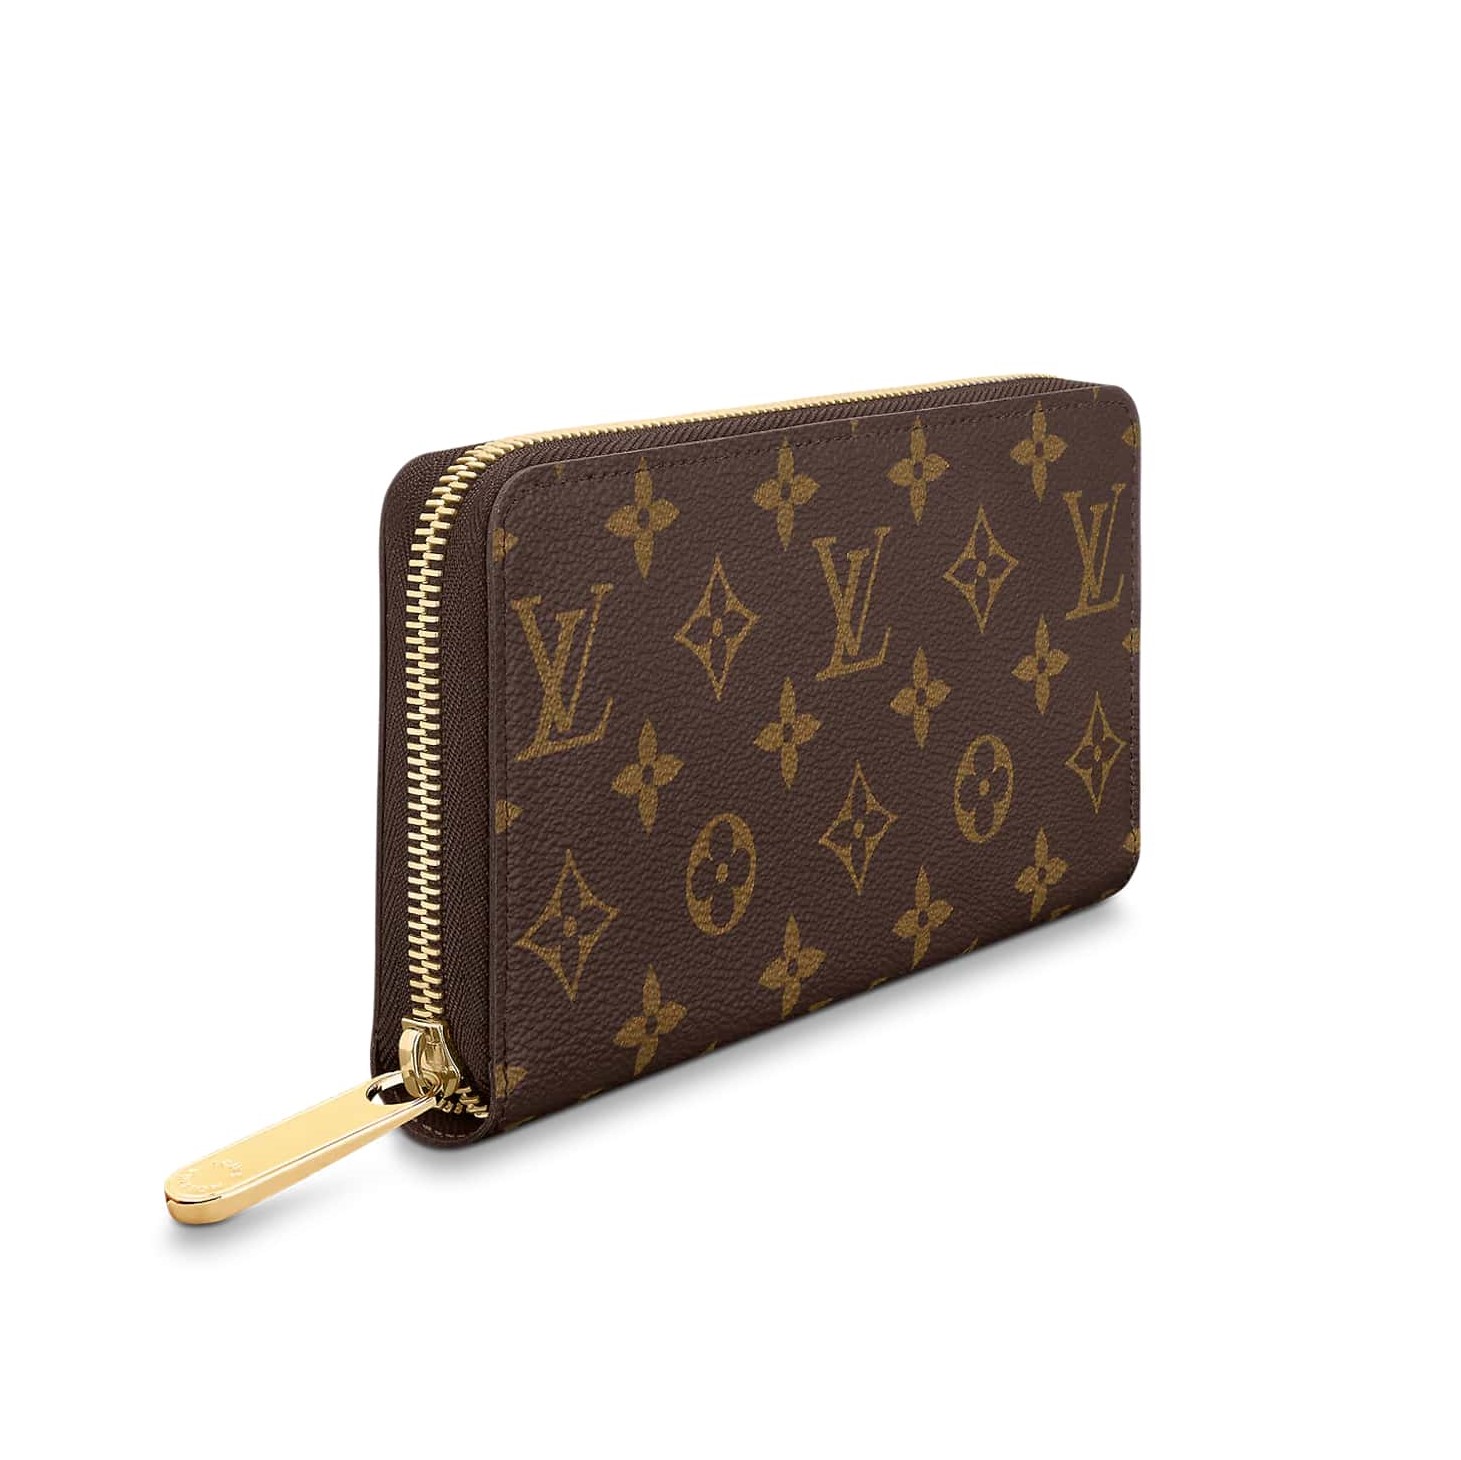 Best Louis Vuitton Wallets 2022 - Read This First